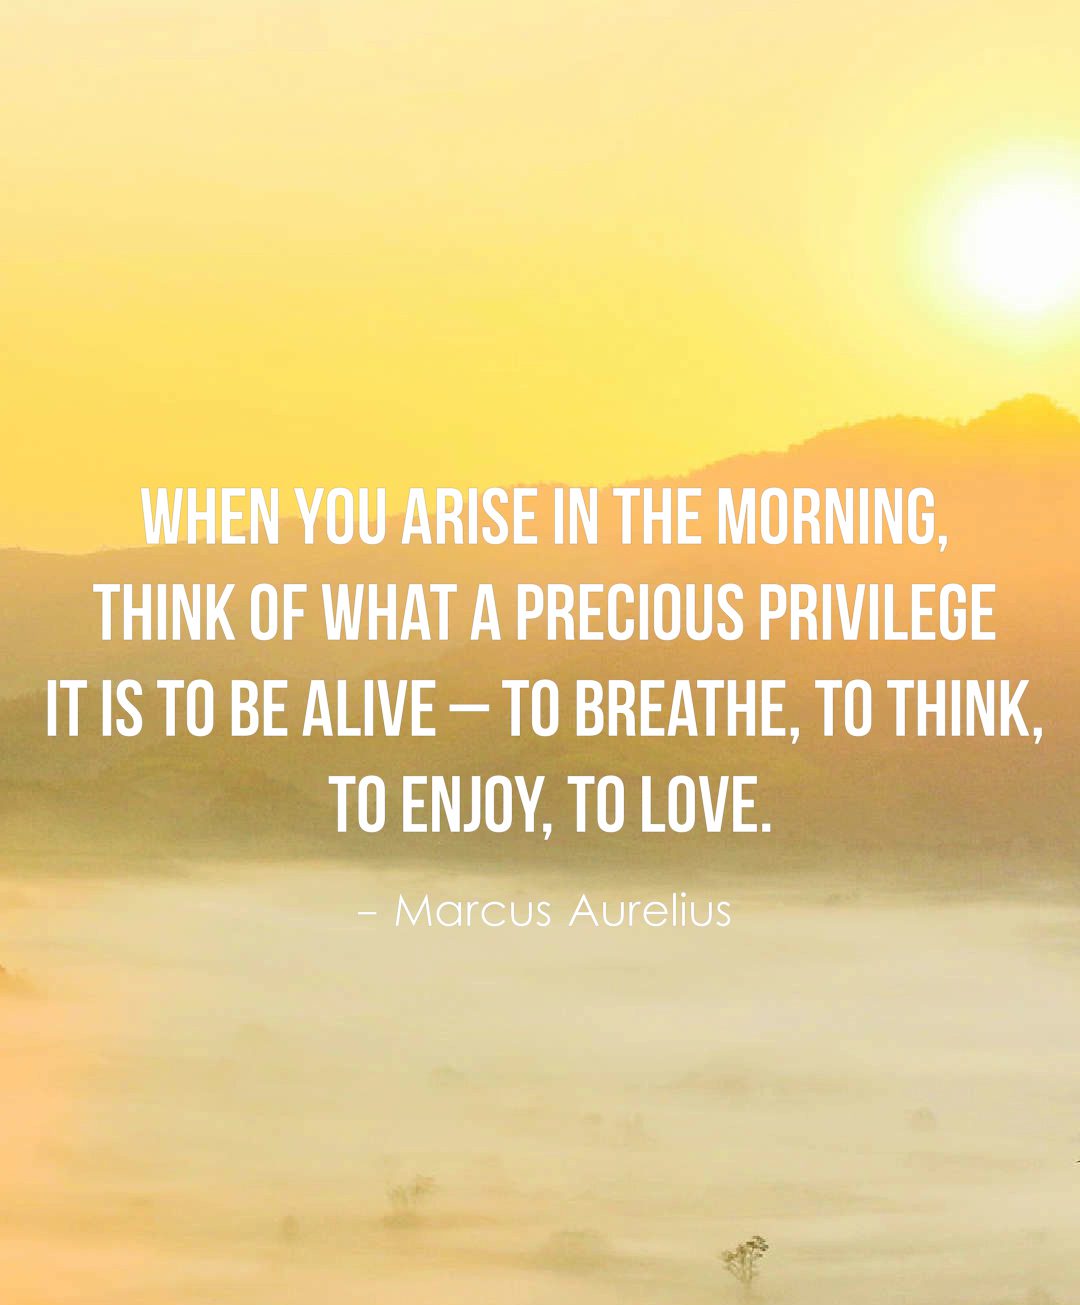 When you arise in the morning, think of what a precious privilege it is to be alive – to breathe, to think, to enjoy, to love.